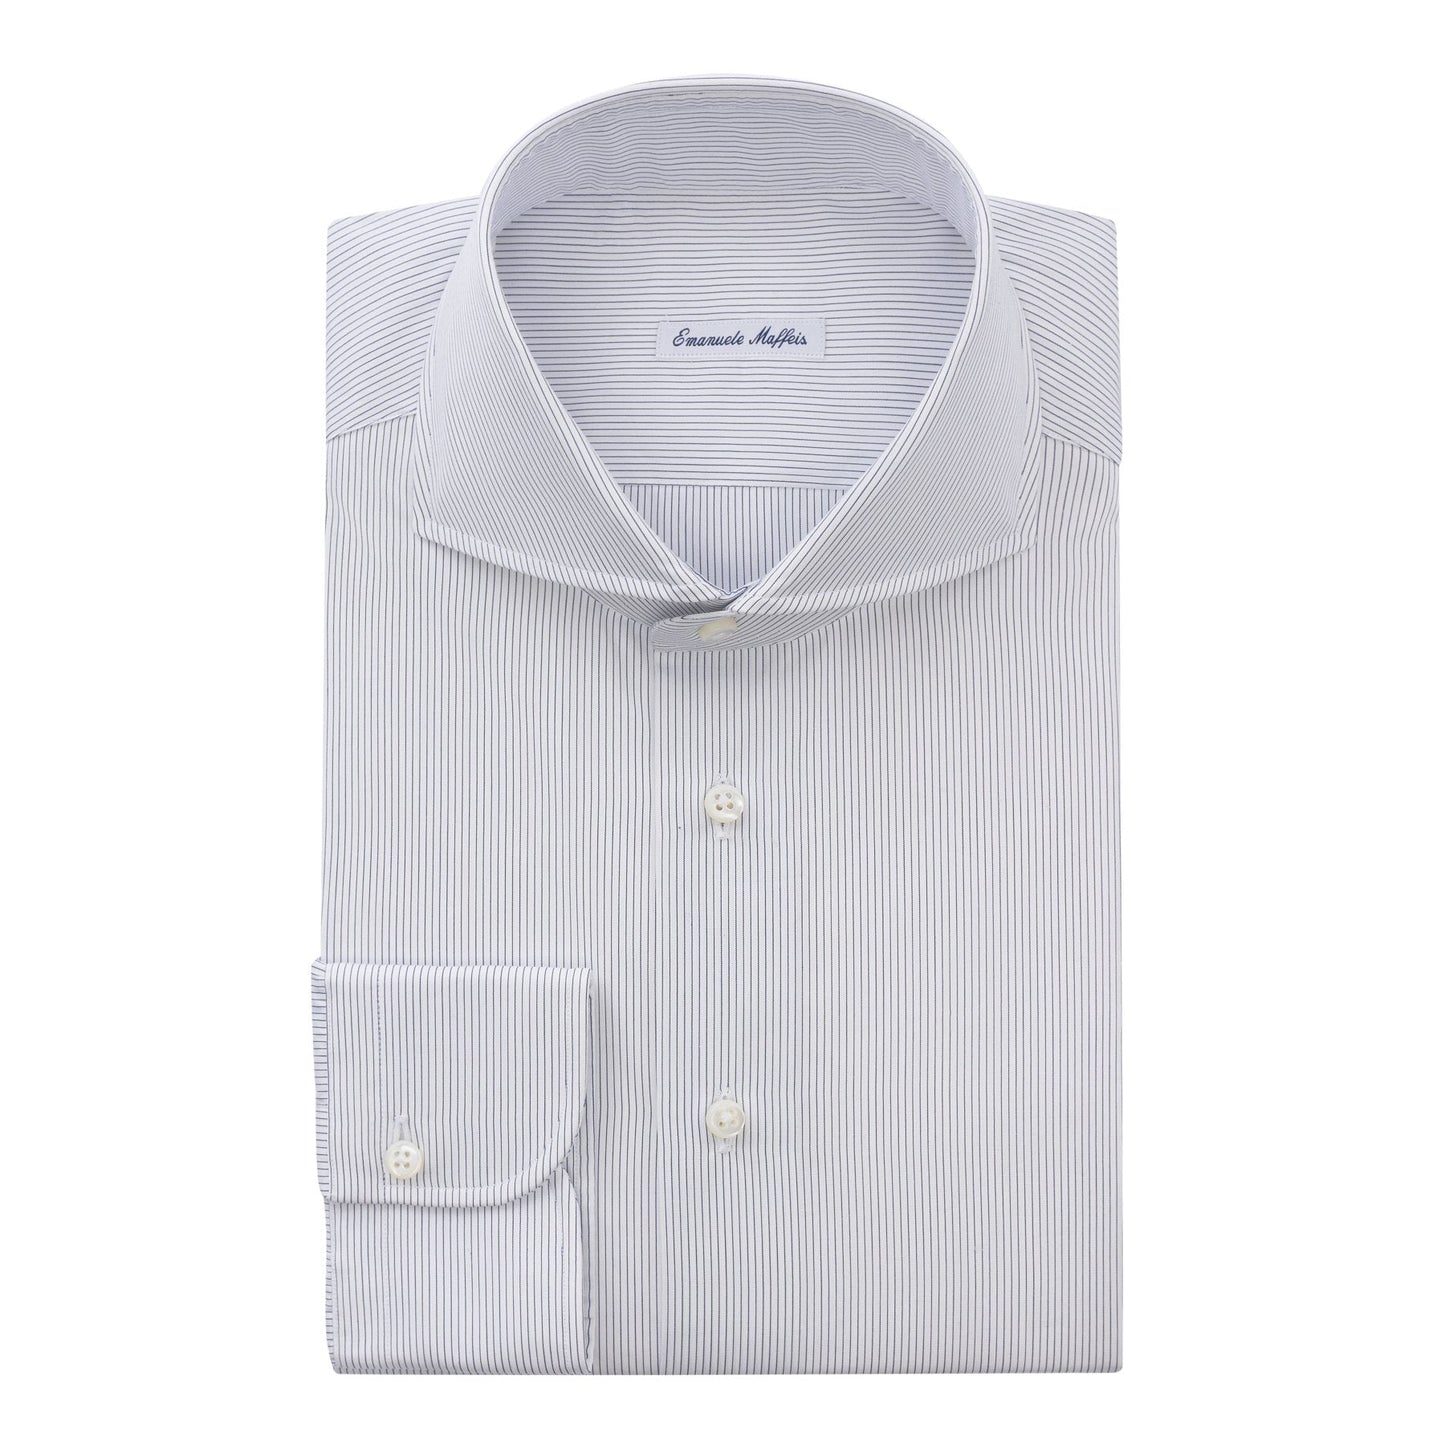 Emanuele Maffeis Pinstriped Cotton White and Blue Shirt with Shark Collar - SARTALE